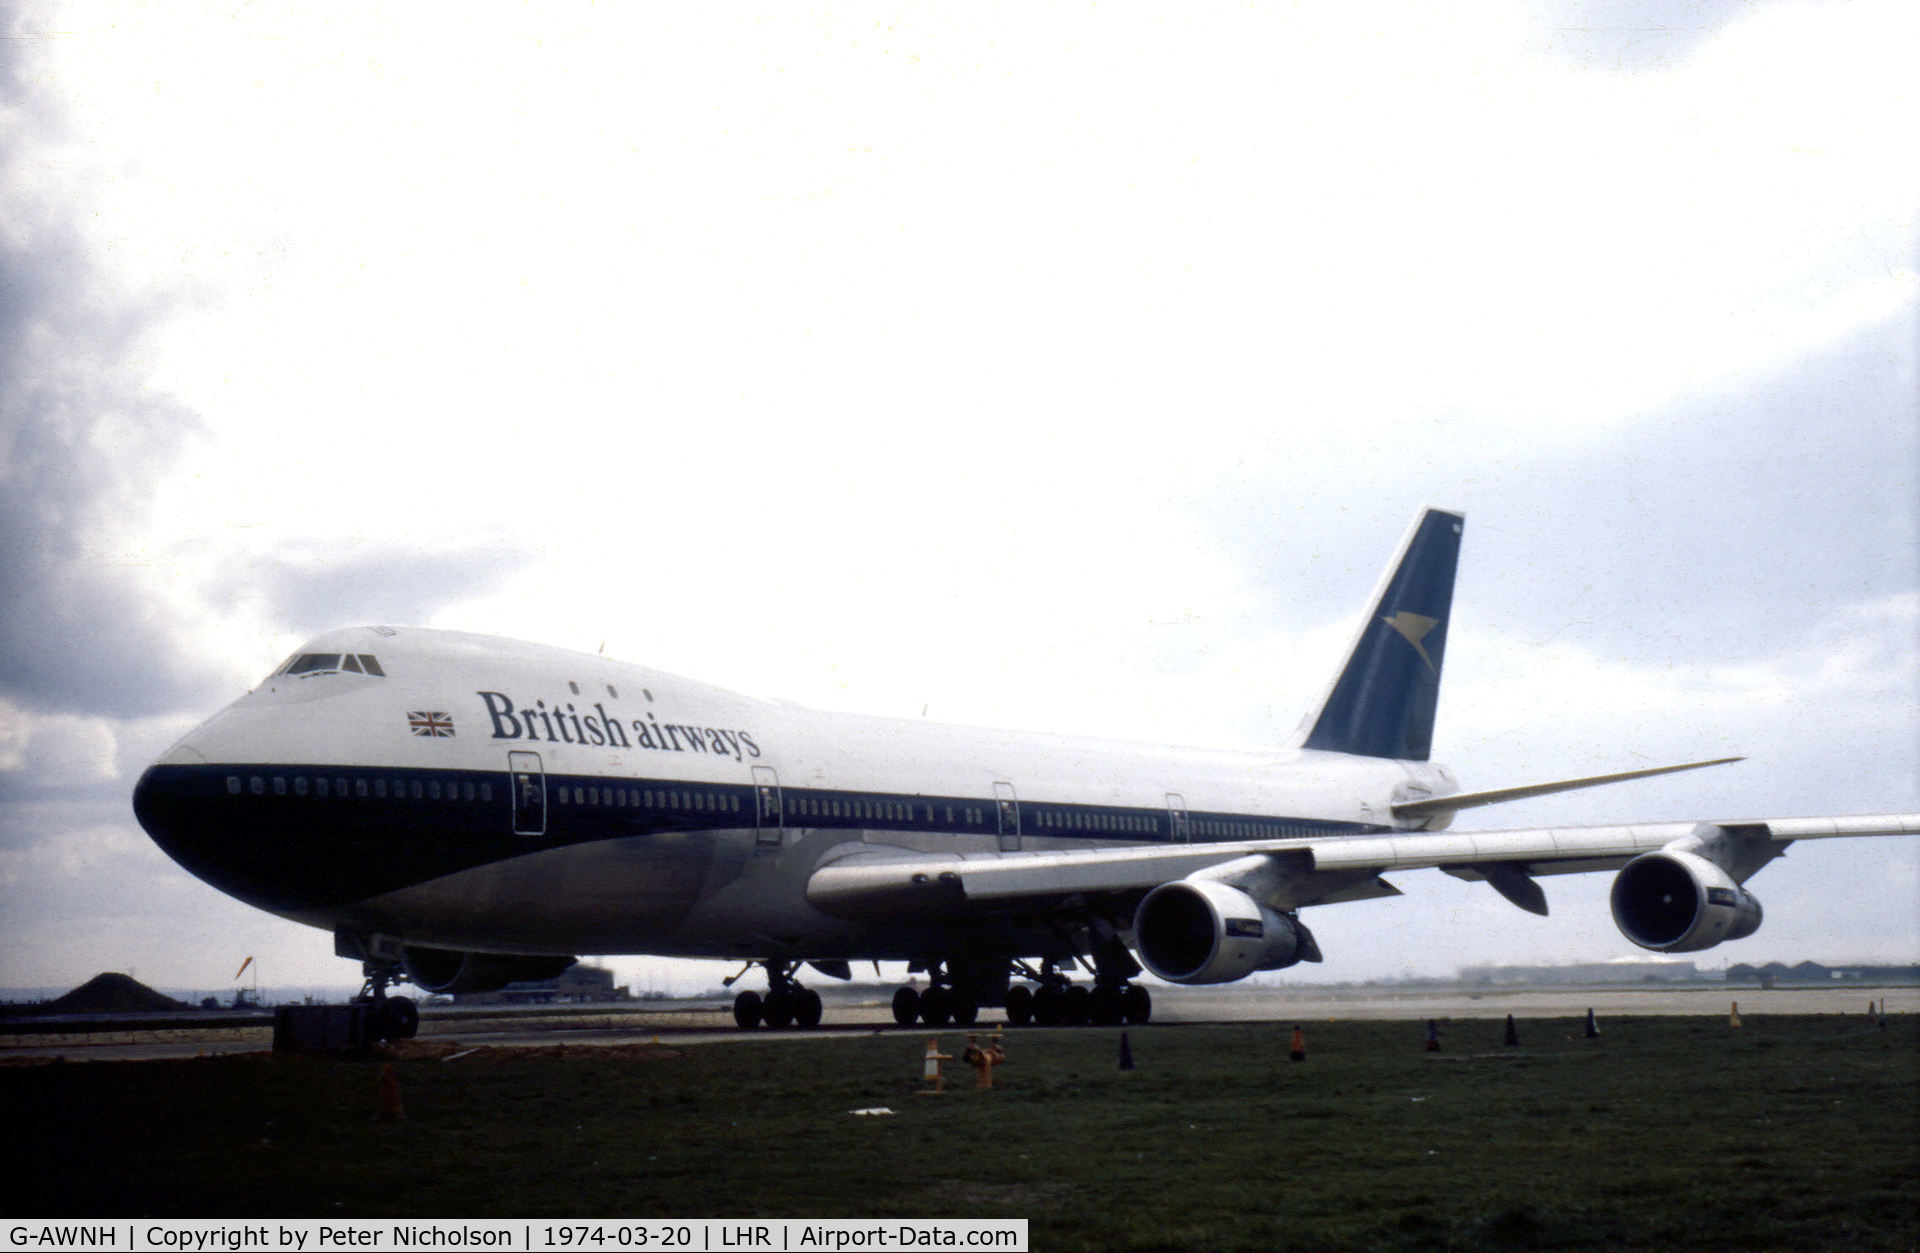 G-AWNH, 1971 Boeing 747-136 C/N 20270, Boeing 747-136 of British Airways as seen at Heathrow in the Spring of 1974.